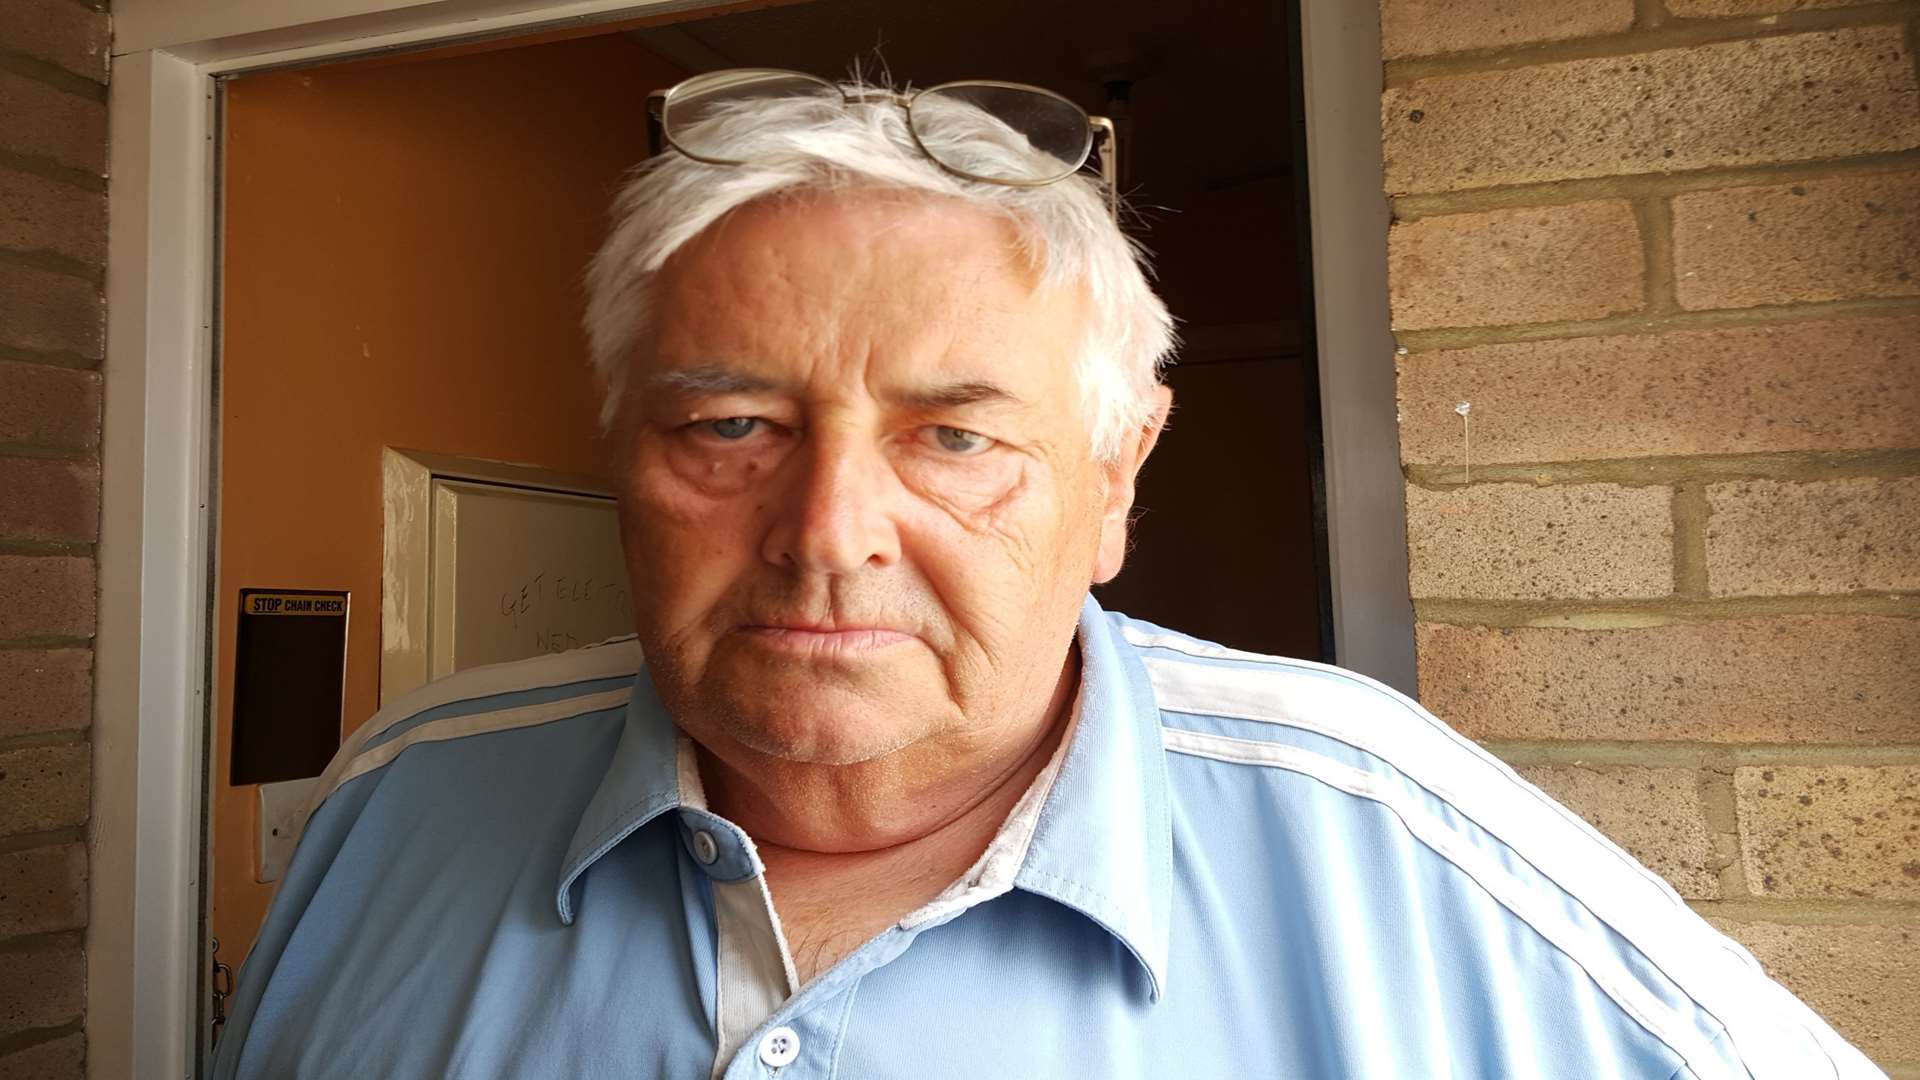 Anthony Bush, who lives on the seventh floor of Margaret Court